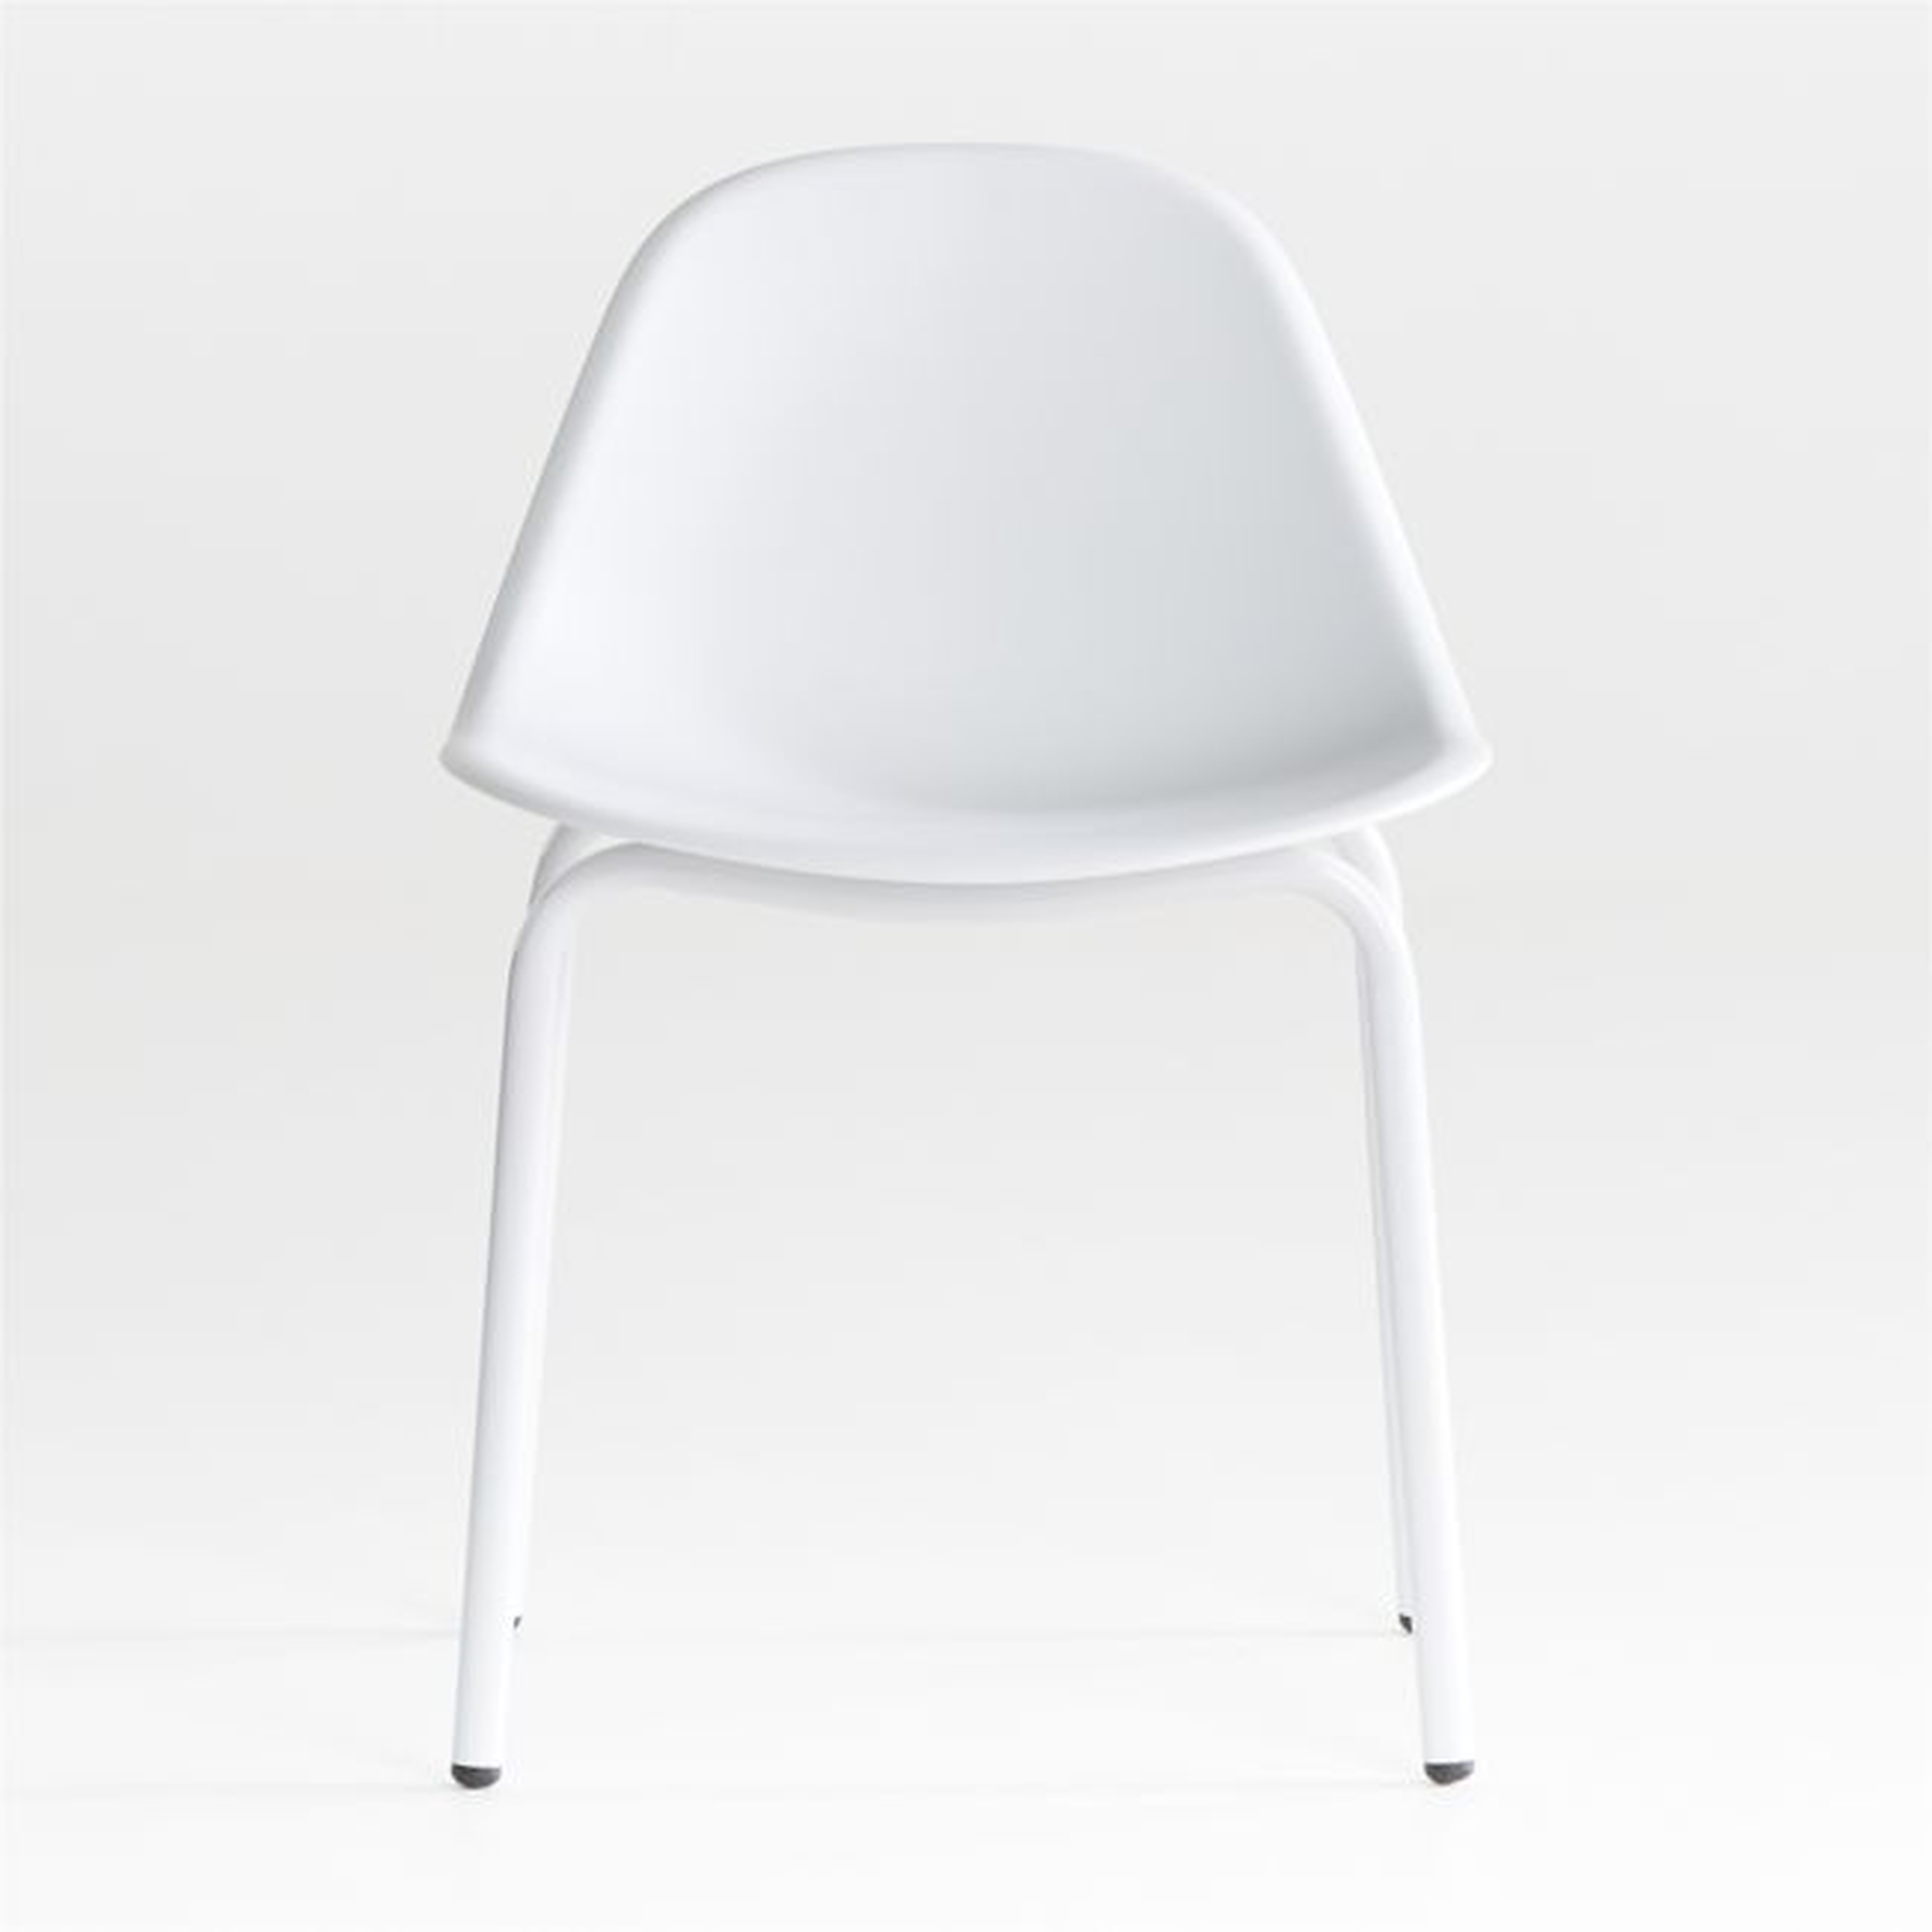 Lennon White Molded Play Chair - Crate and Barrel